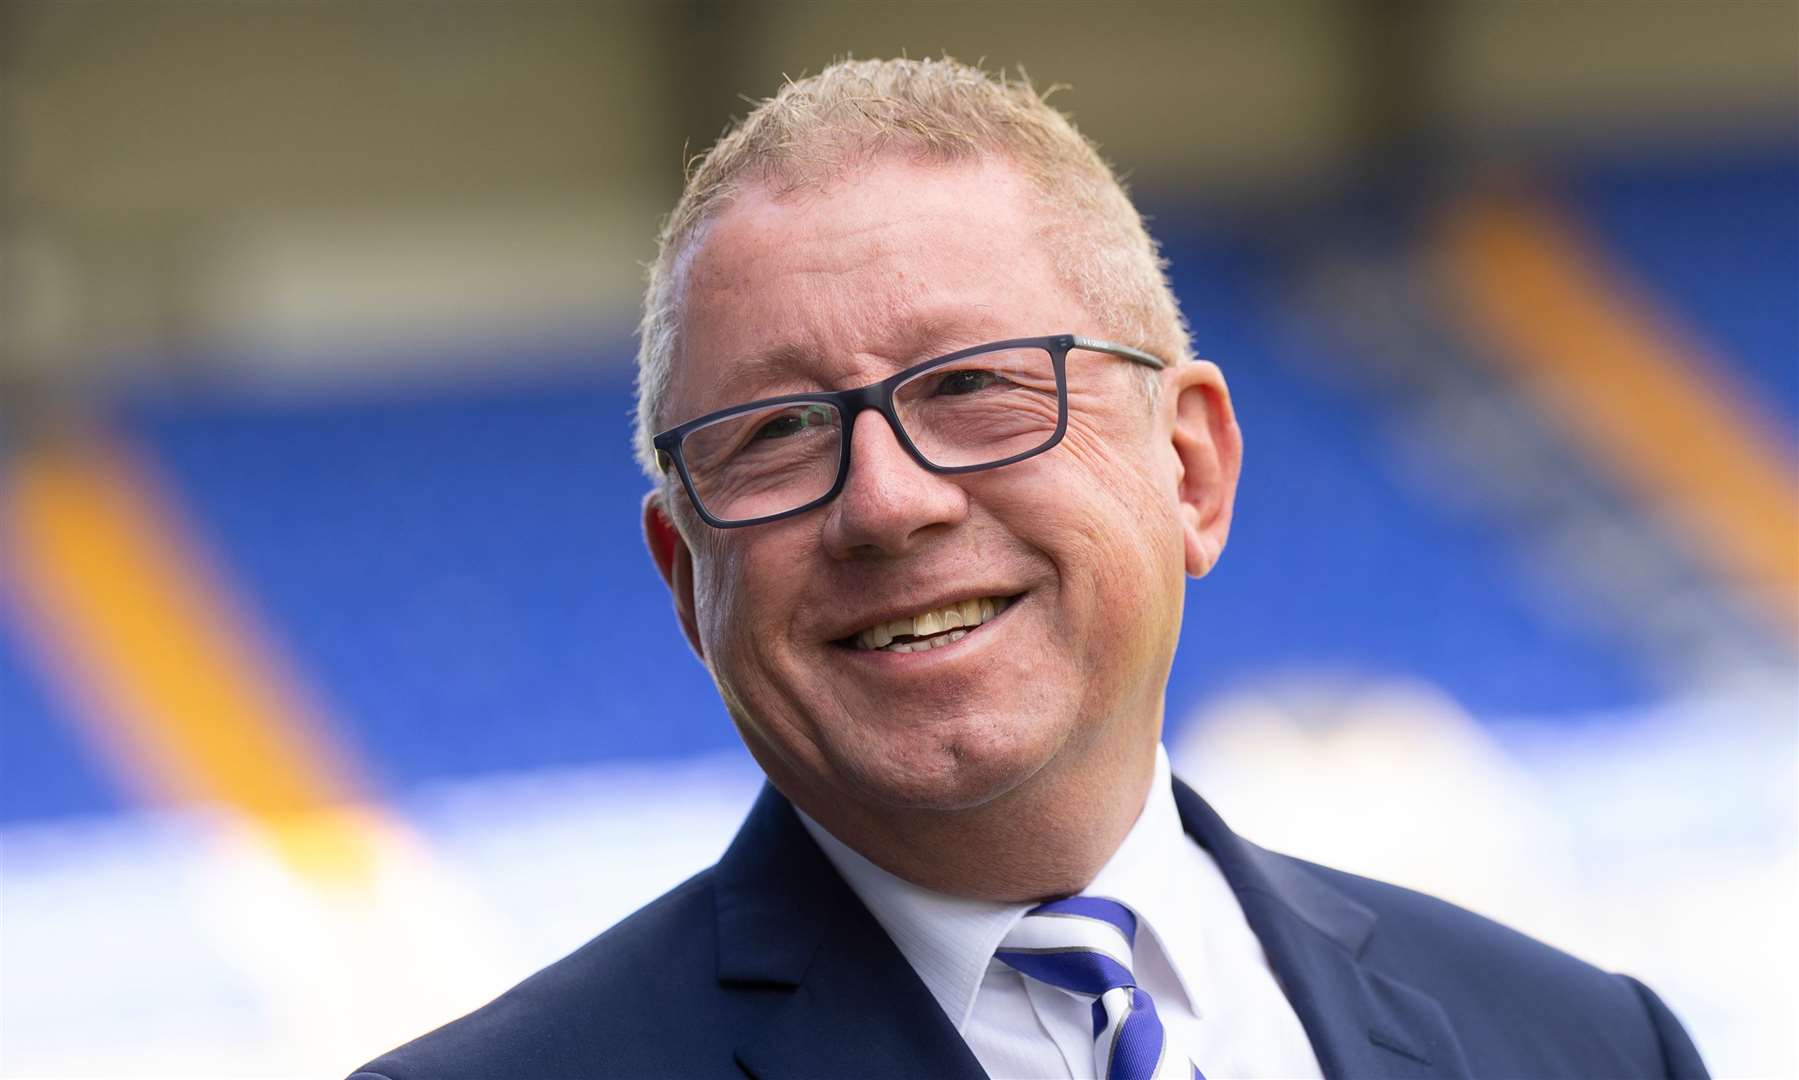 Gillingham chairman Paul Scally is seeking a new manager after Steve Evans' exit